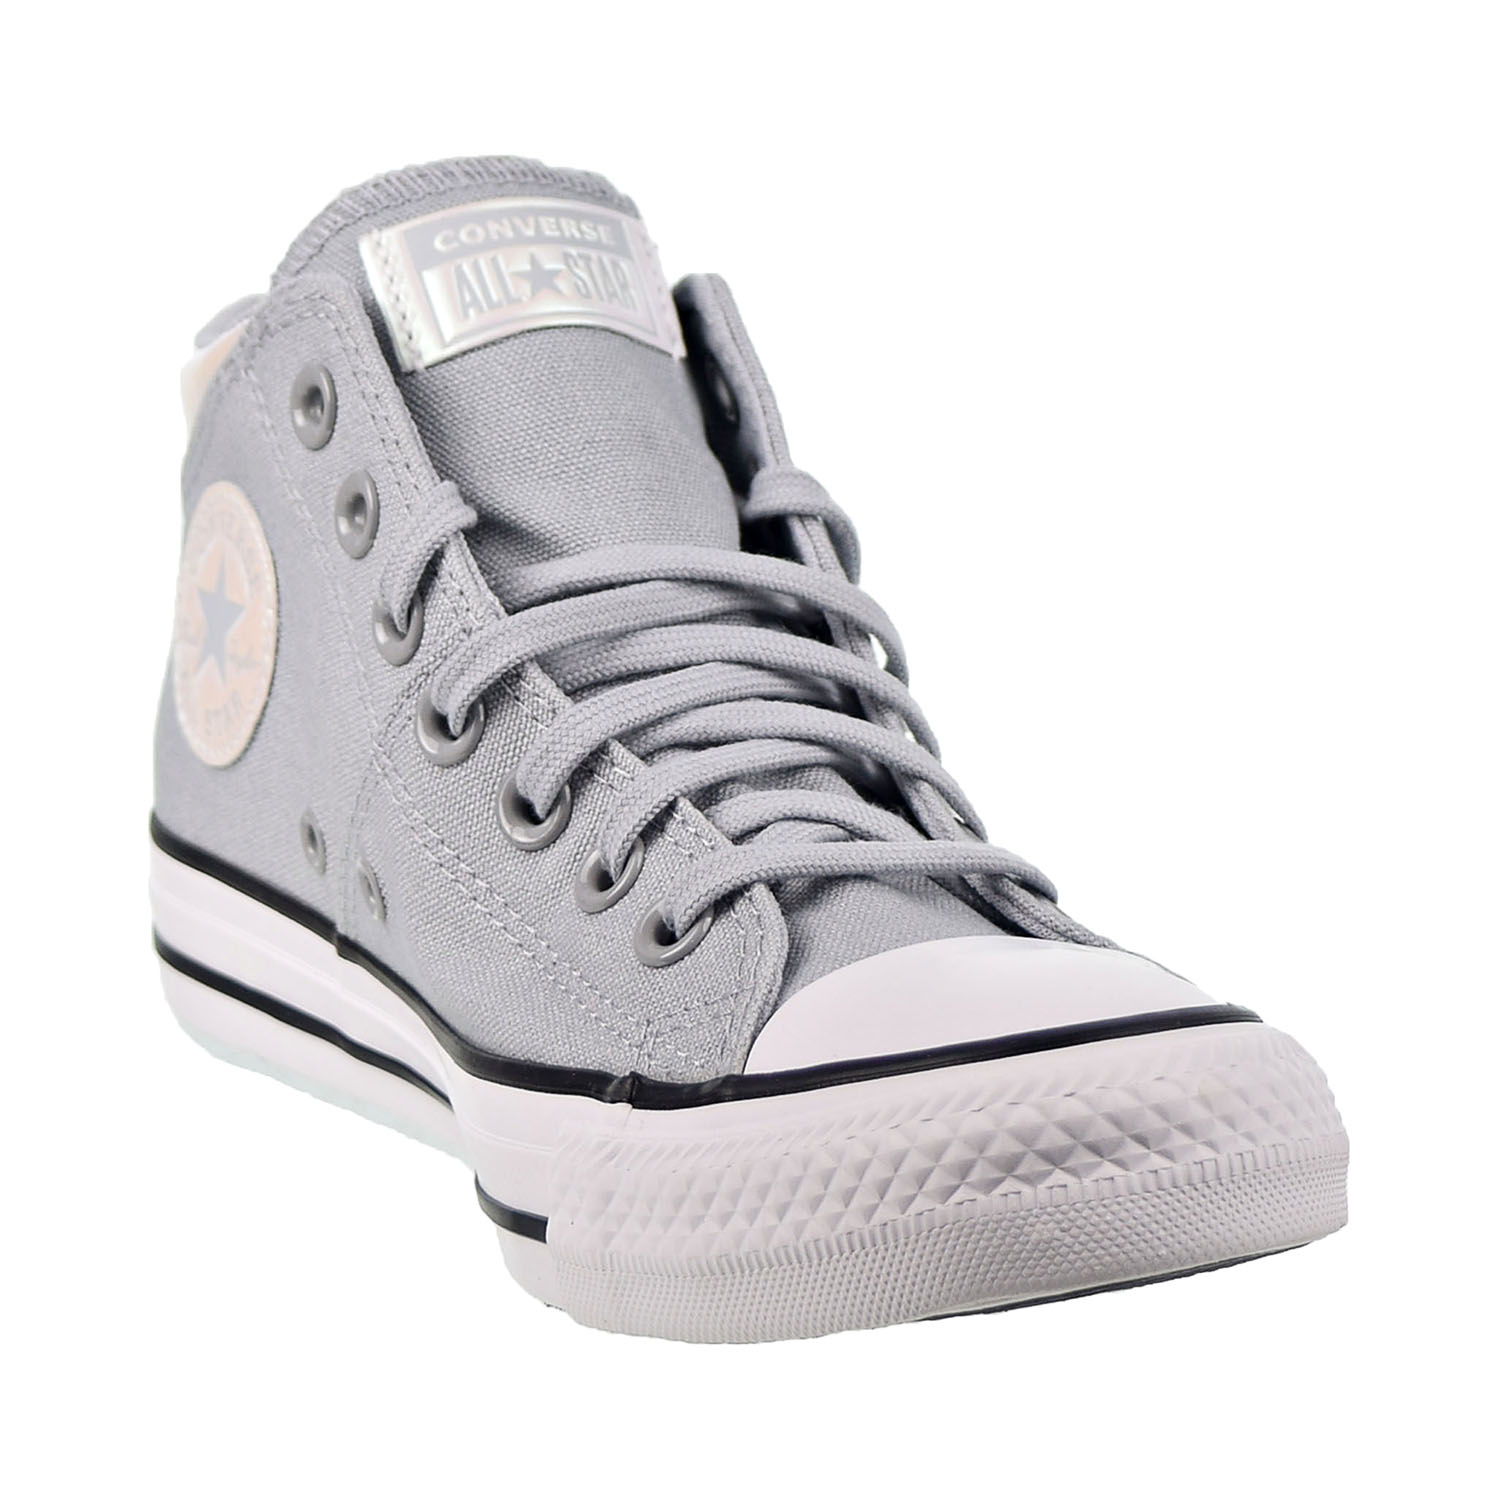 converse madison mid sneakers